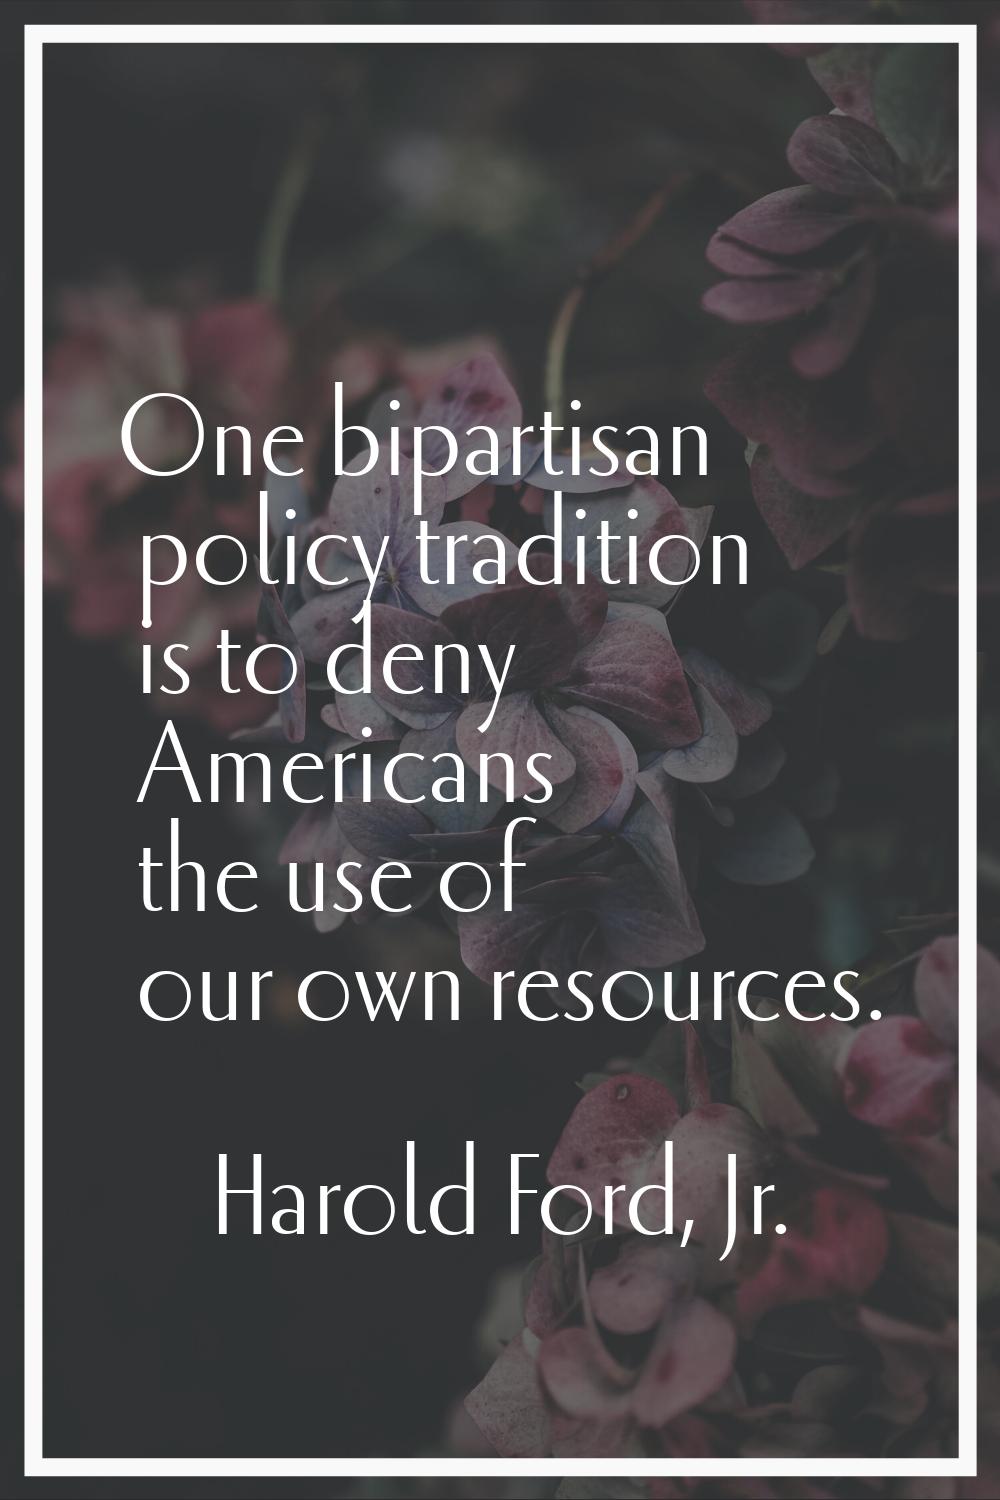 One bipartisan policy tradition is to deny Americans the use of our own resources.